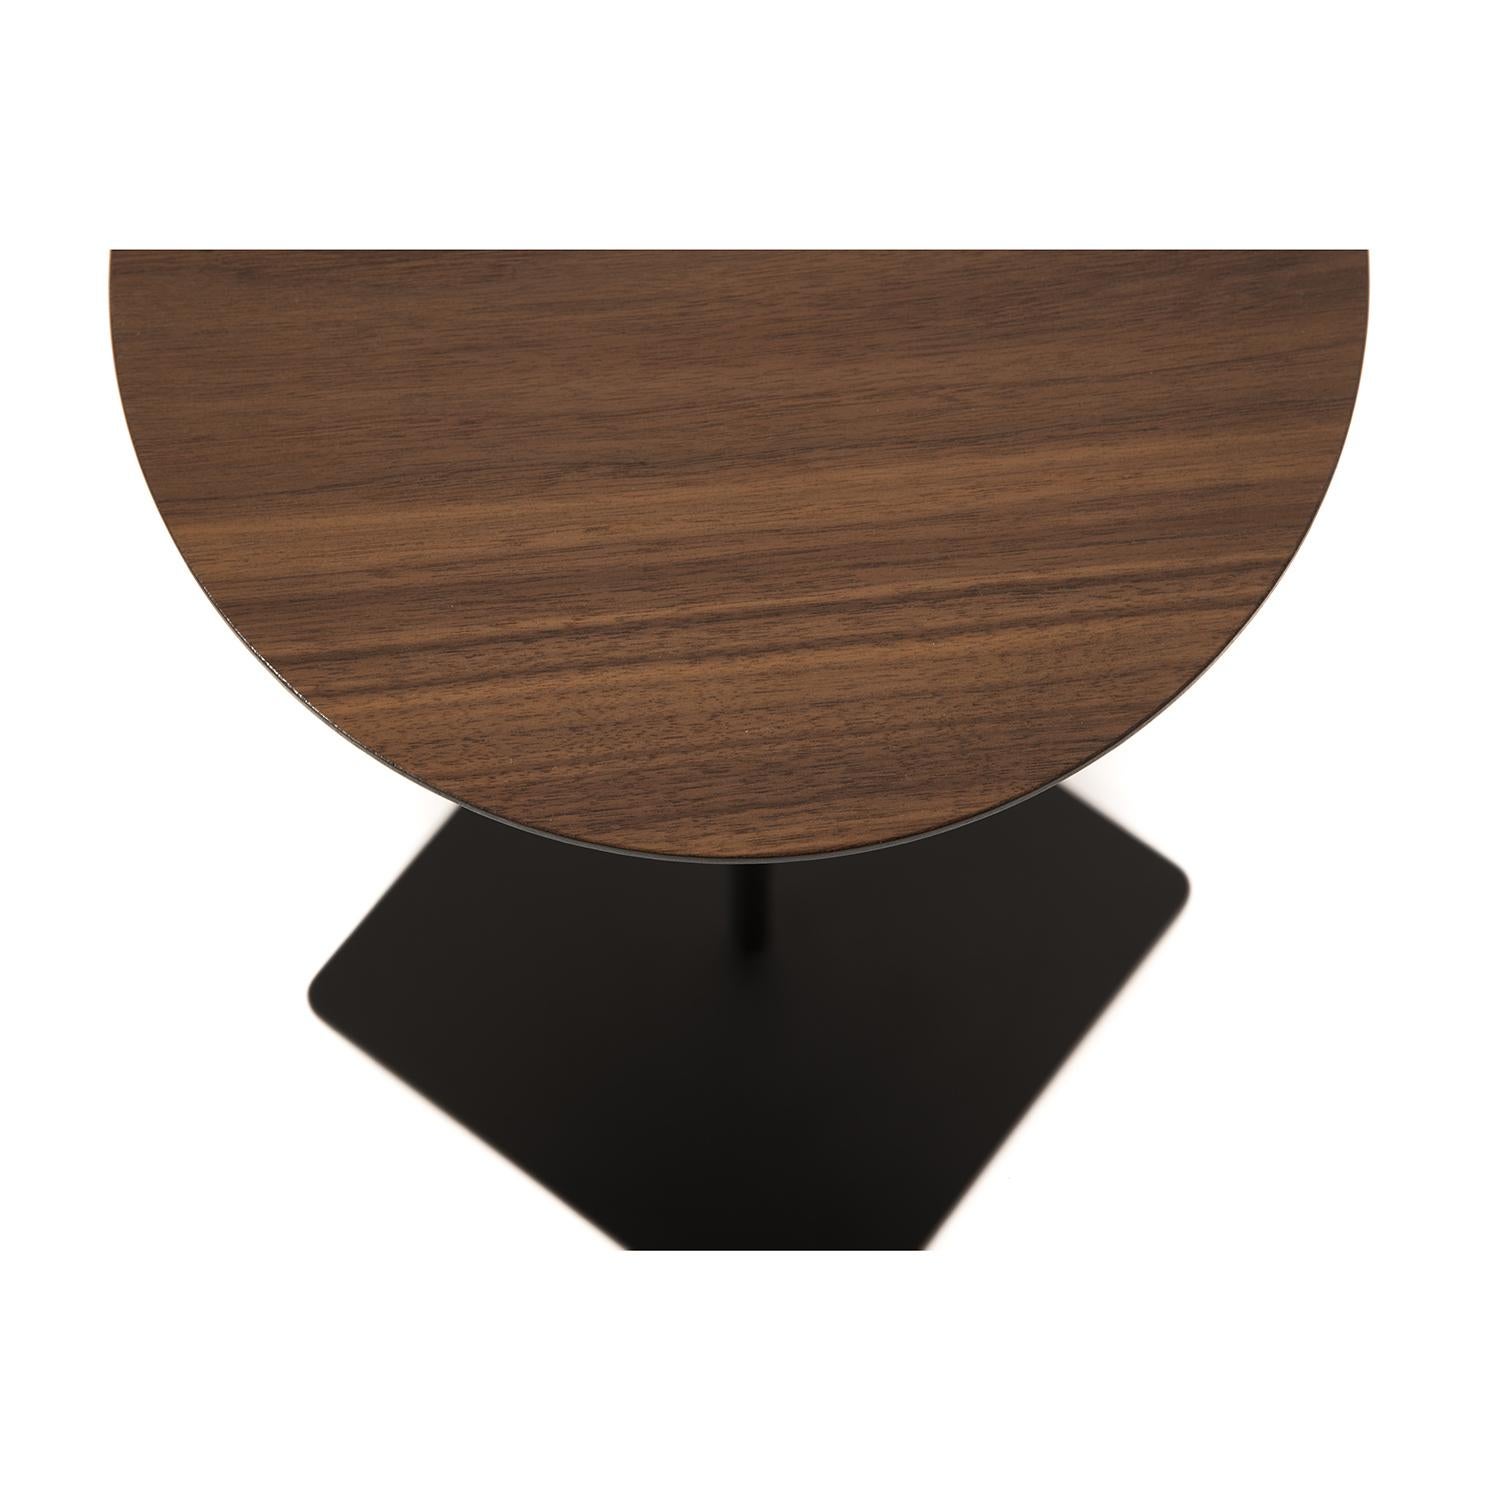 American Modernist Walnut Top Cocktail Table with Steel Base